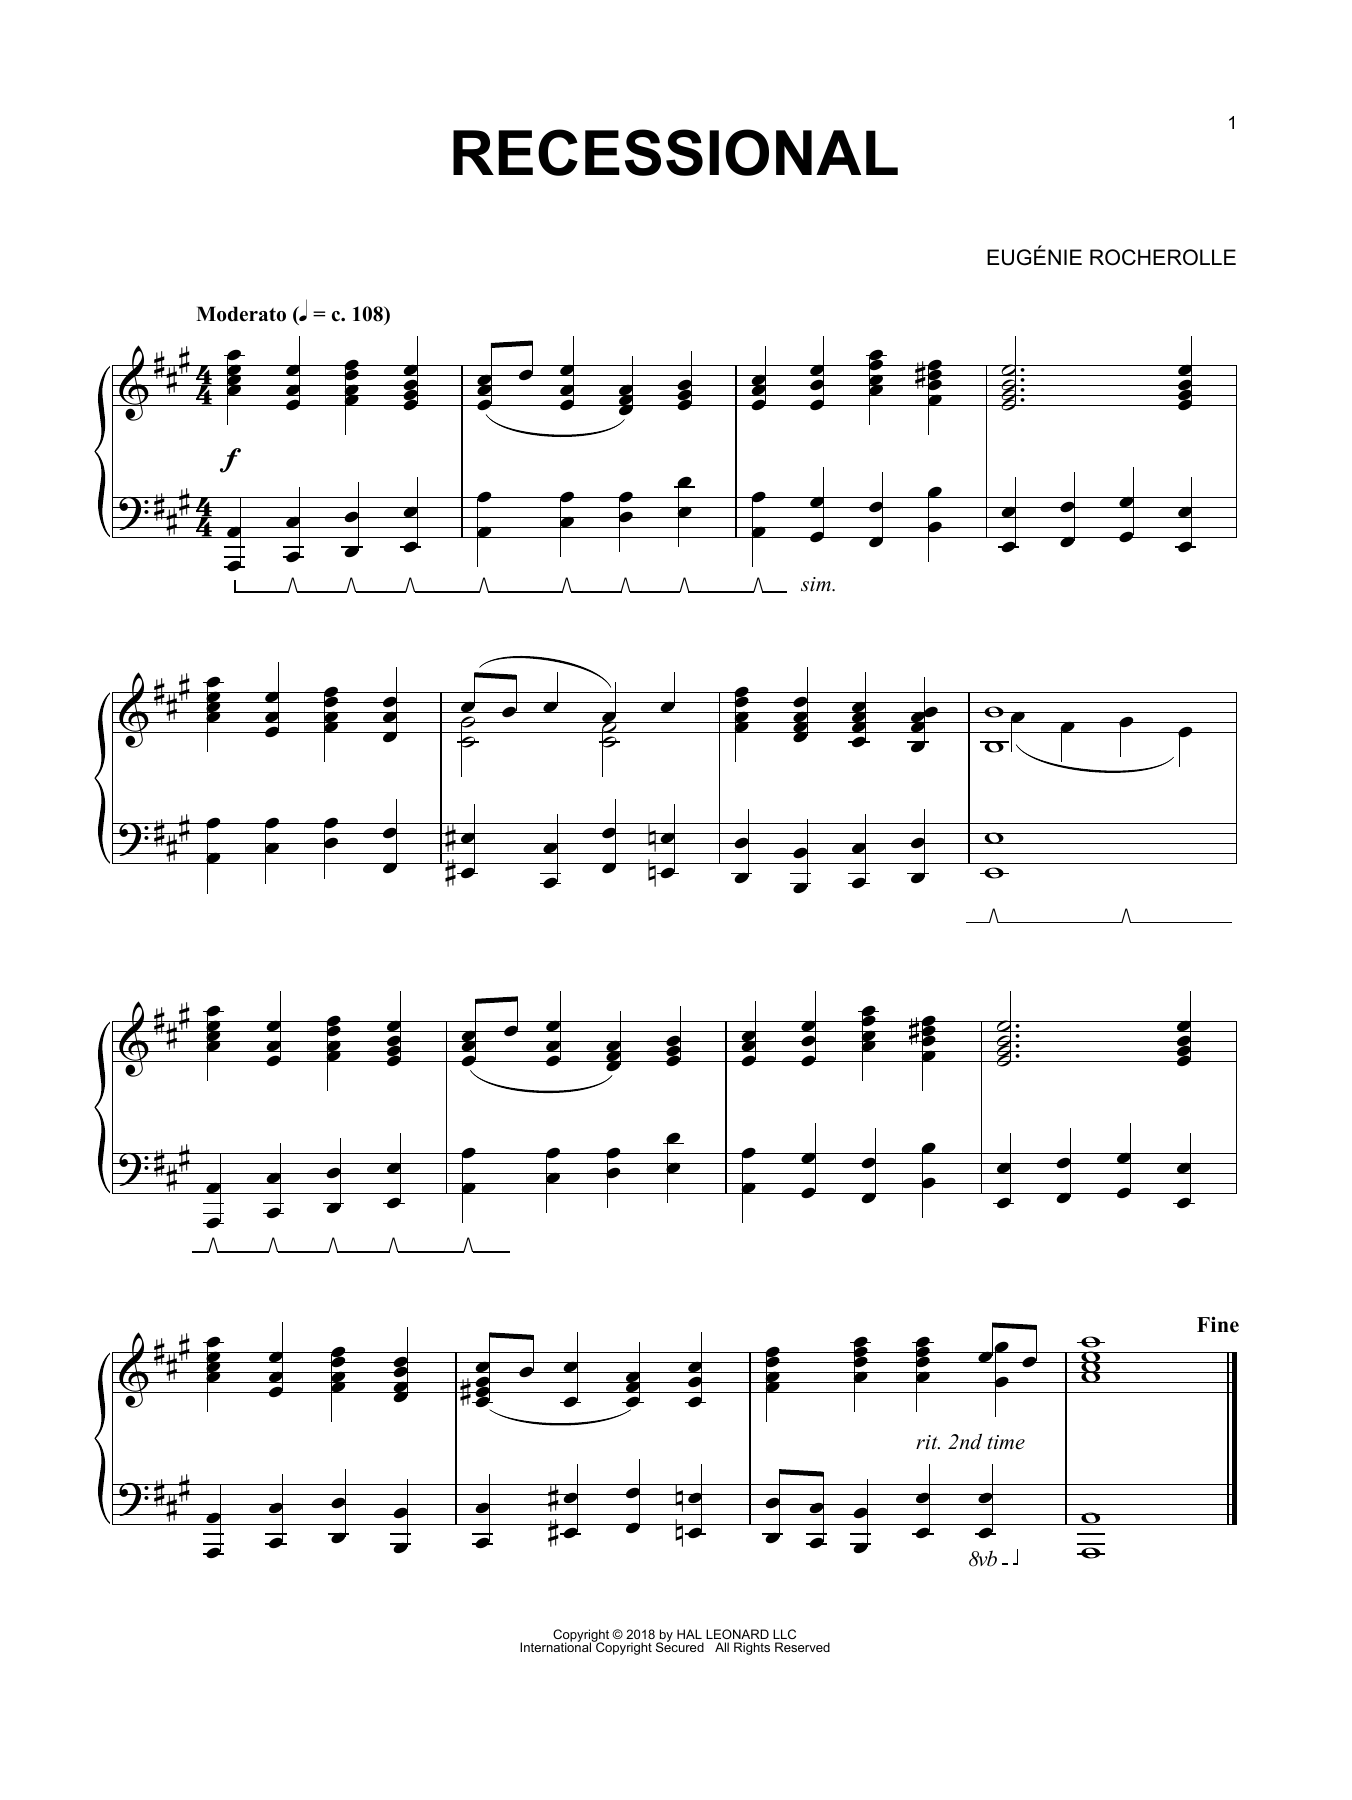 Download Eugenie Rocherolle Recessional Sheet Music